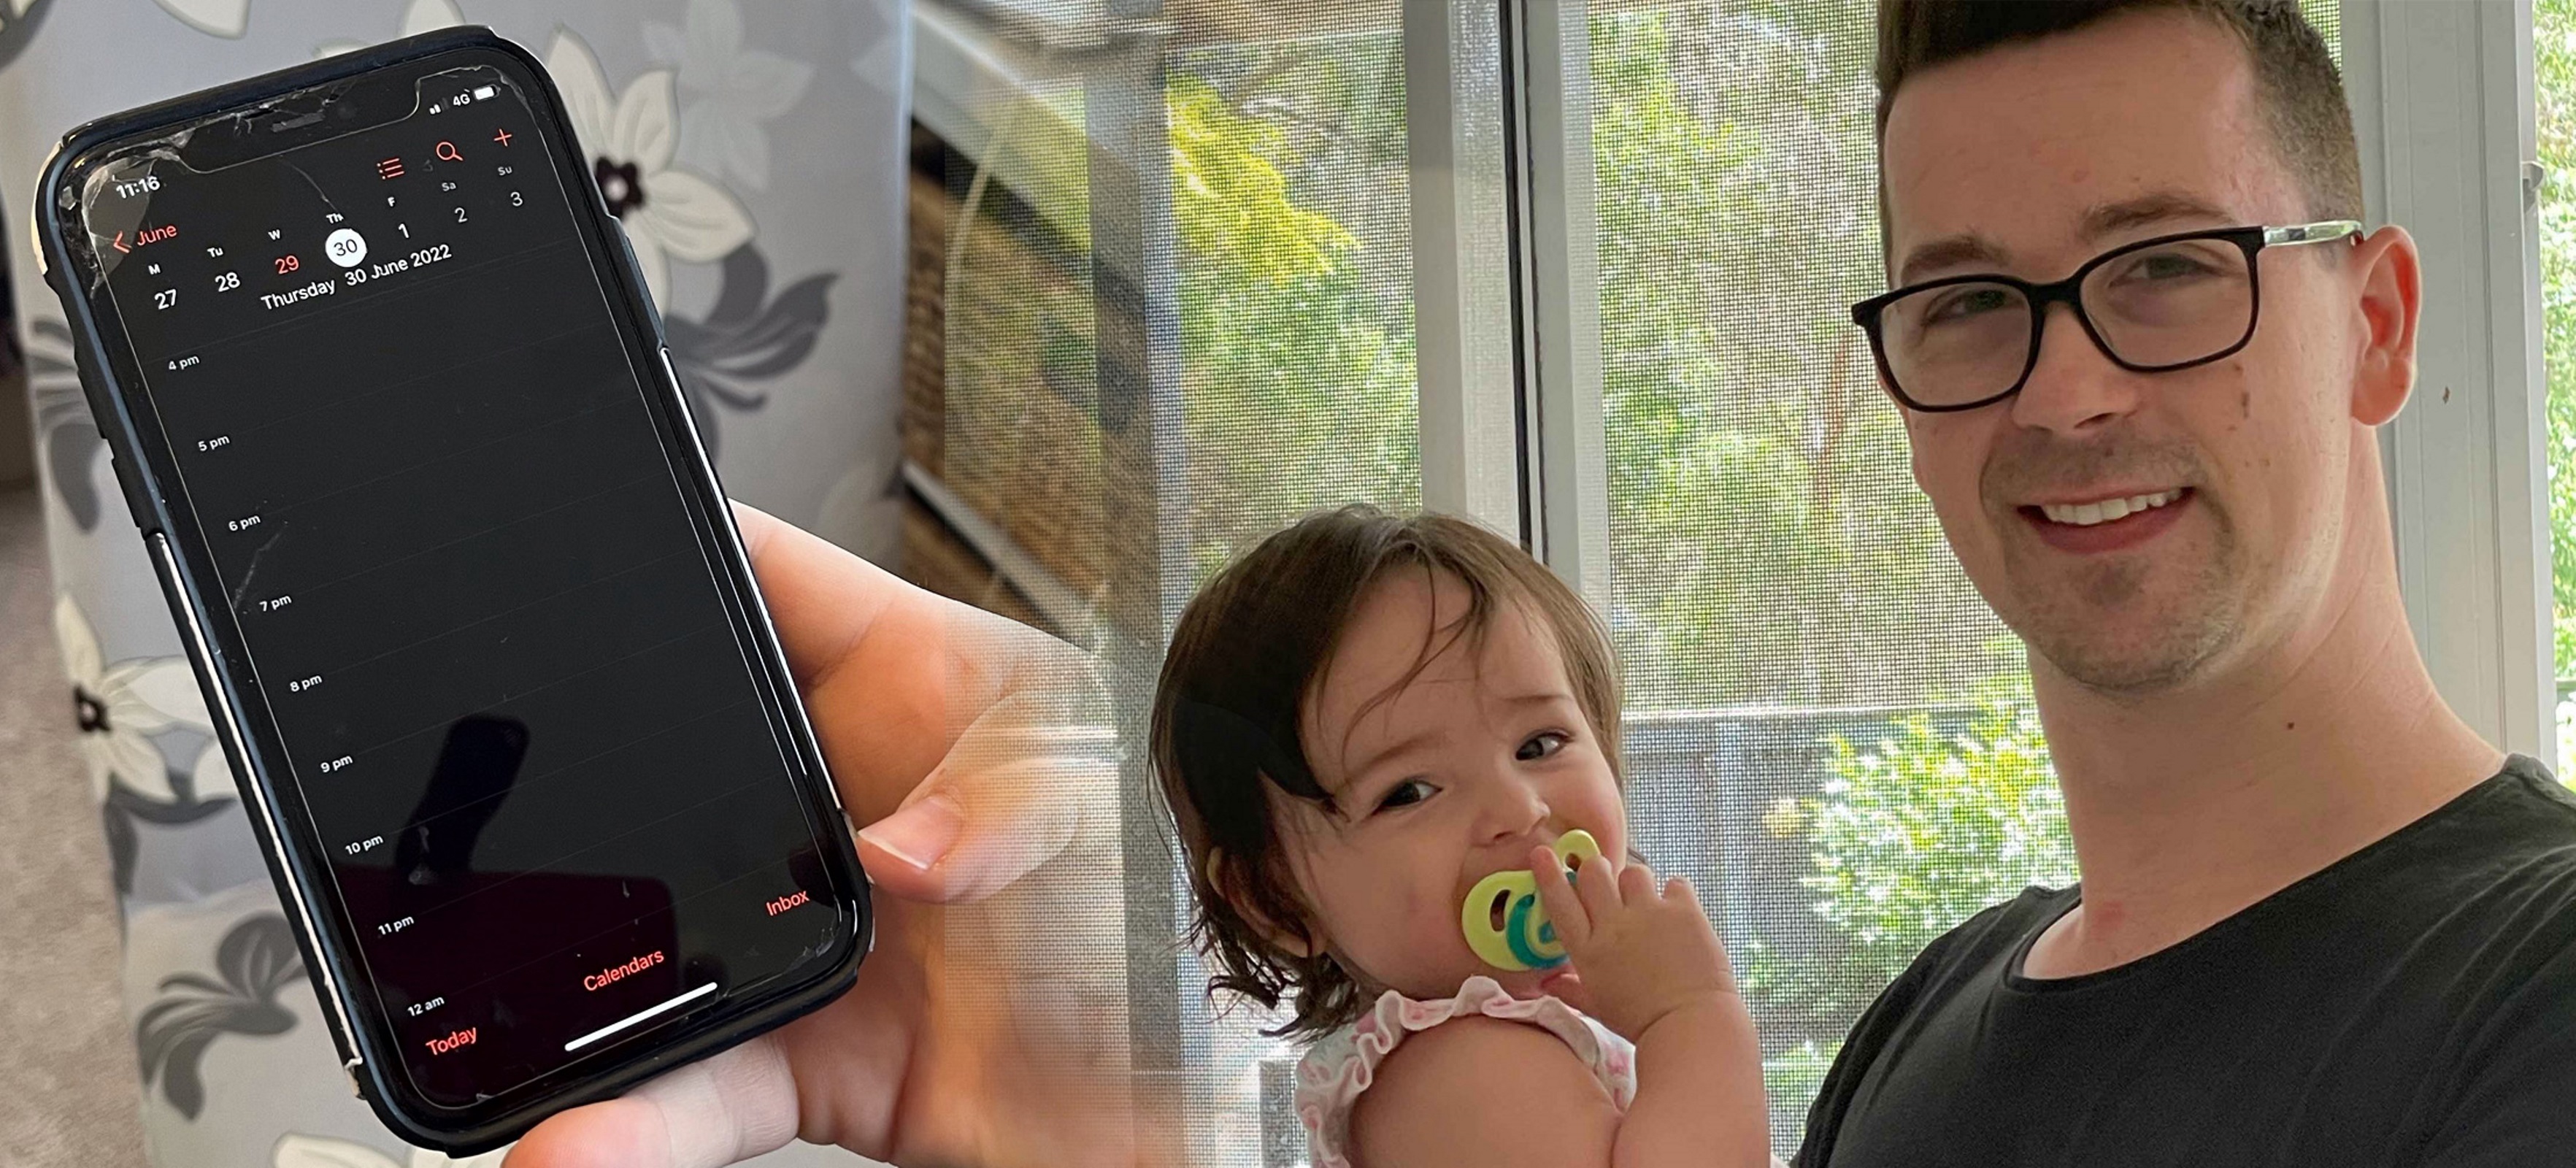 A man is holding his young daughter in his arms as they both smile at the camera. To the side is a hand holding a mobile phone showing a calendar on the screen.